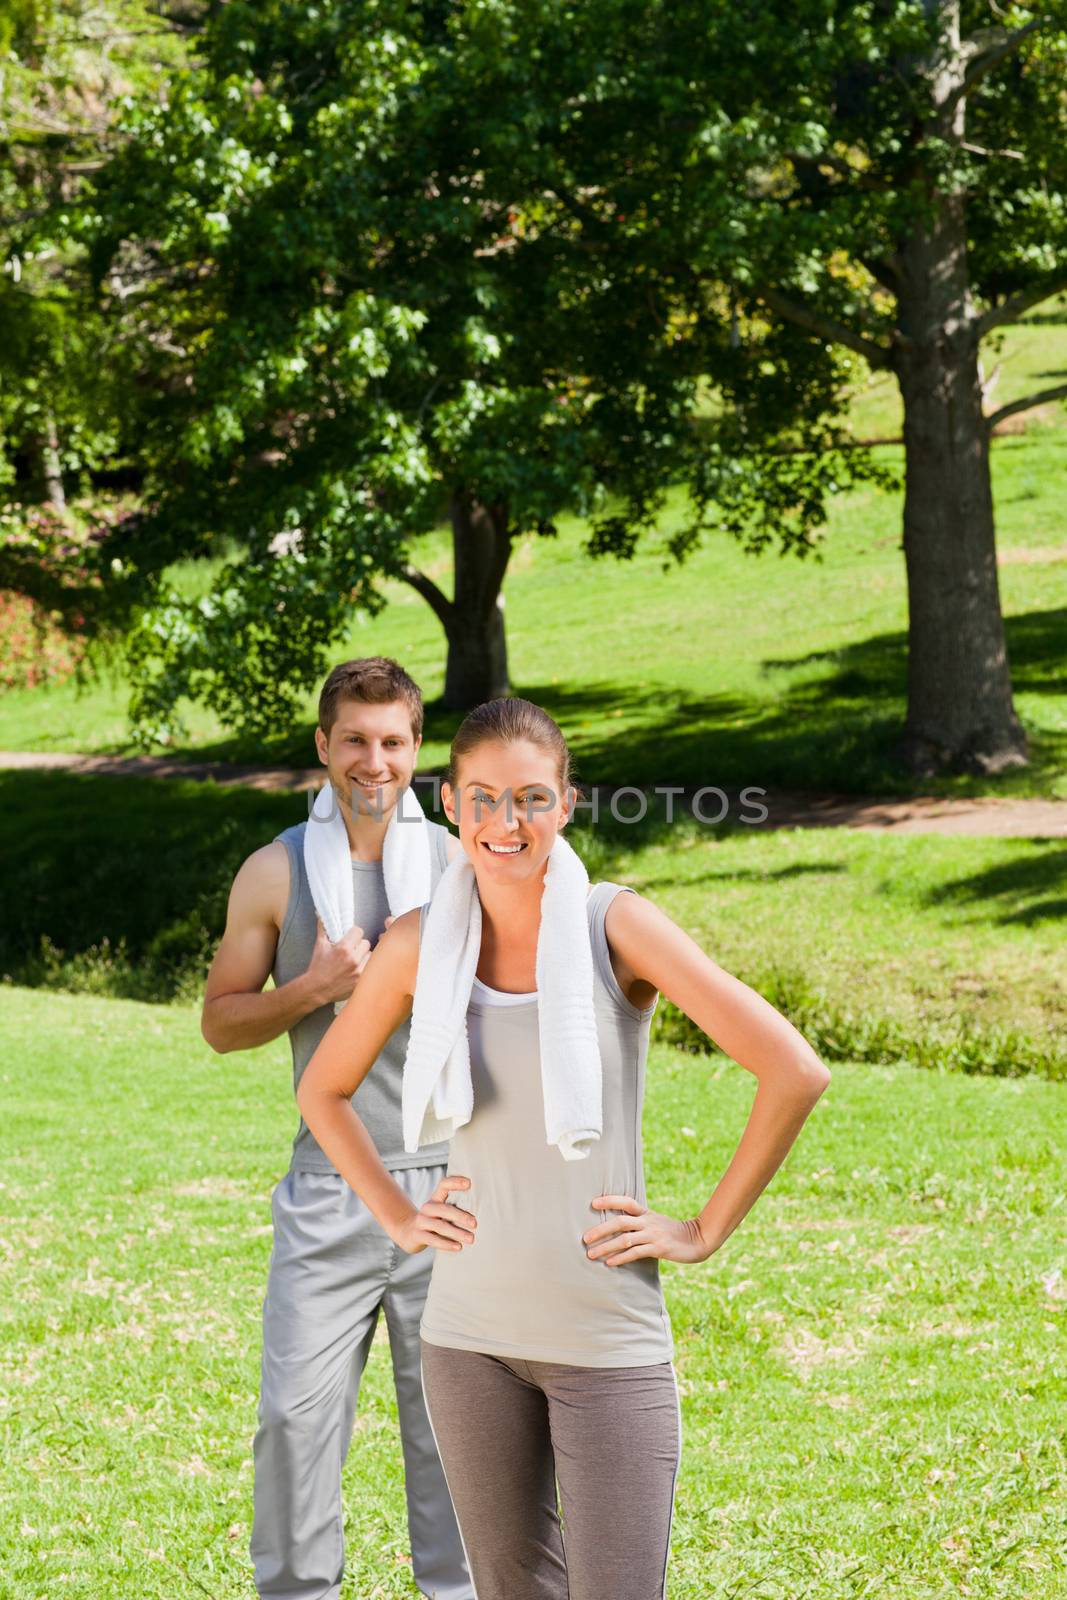 Exhausted couple in the park during the summer